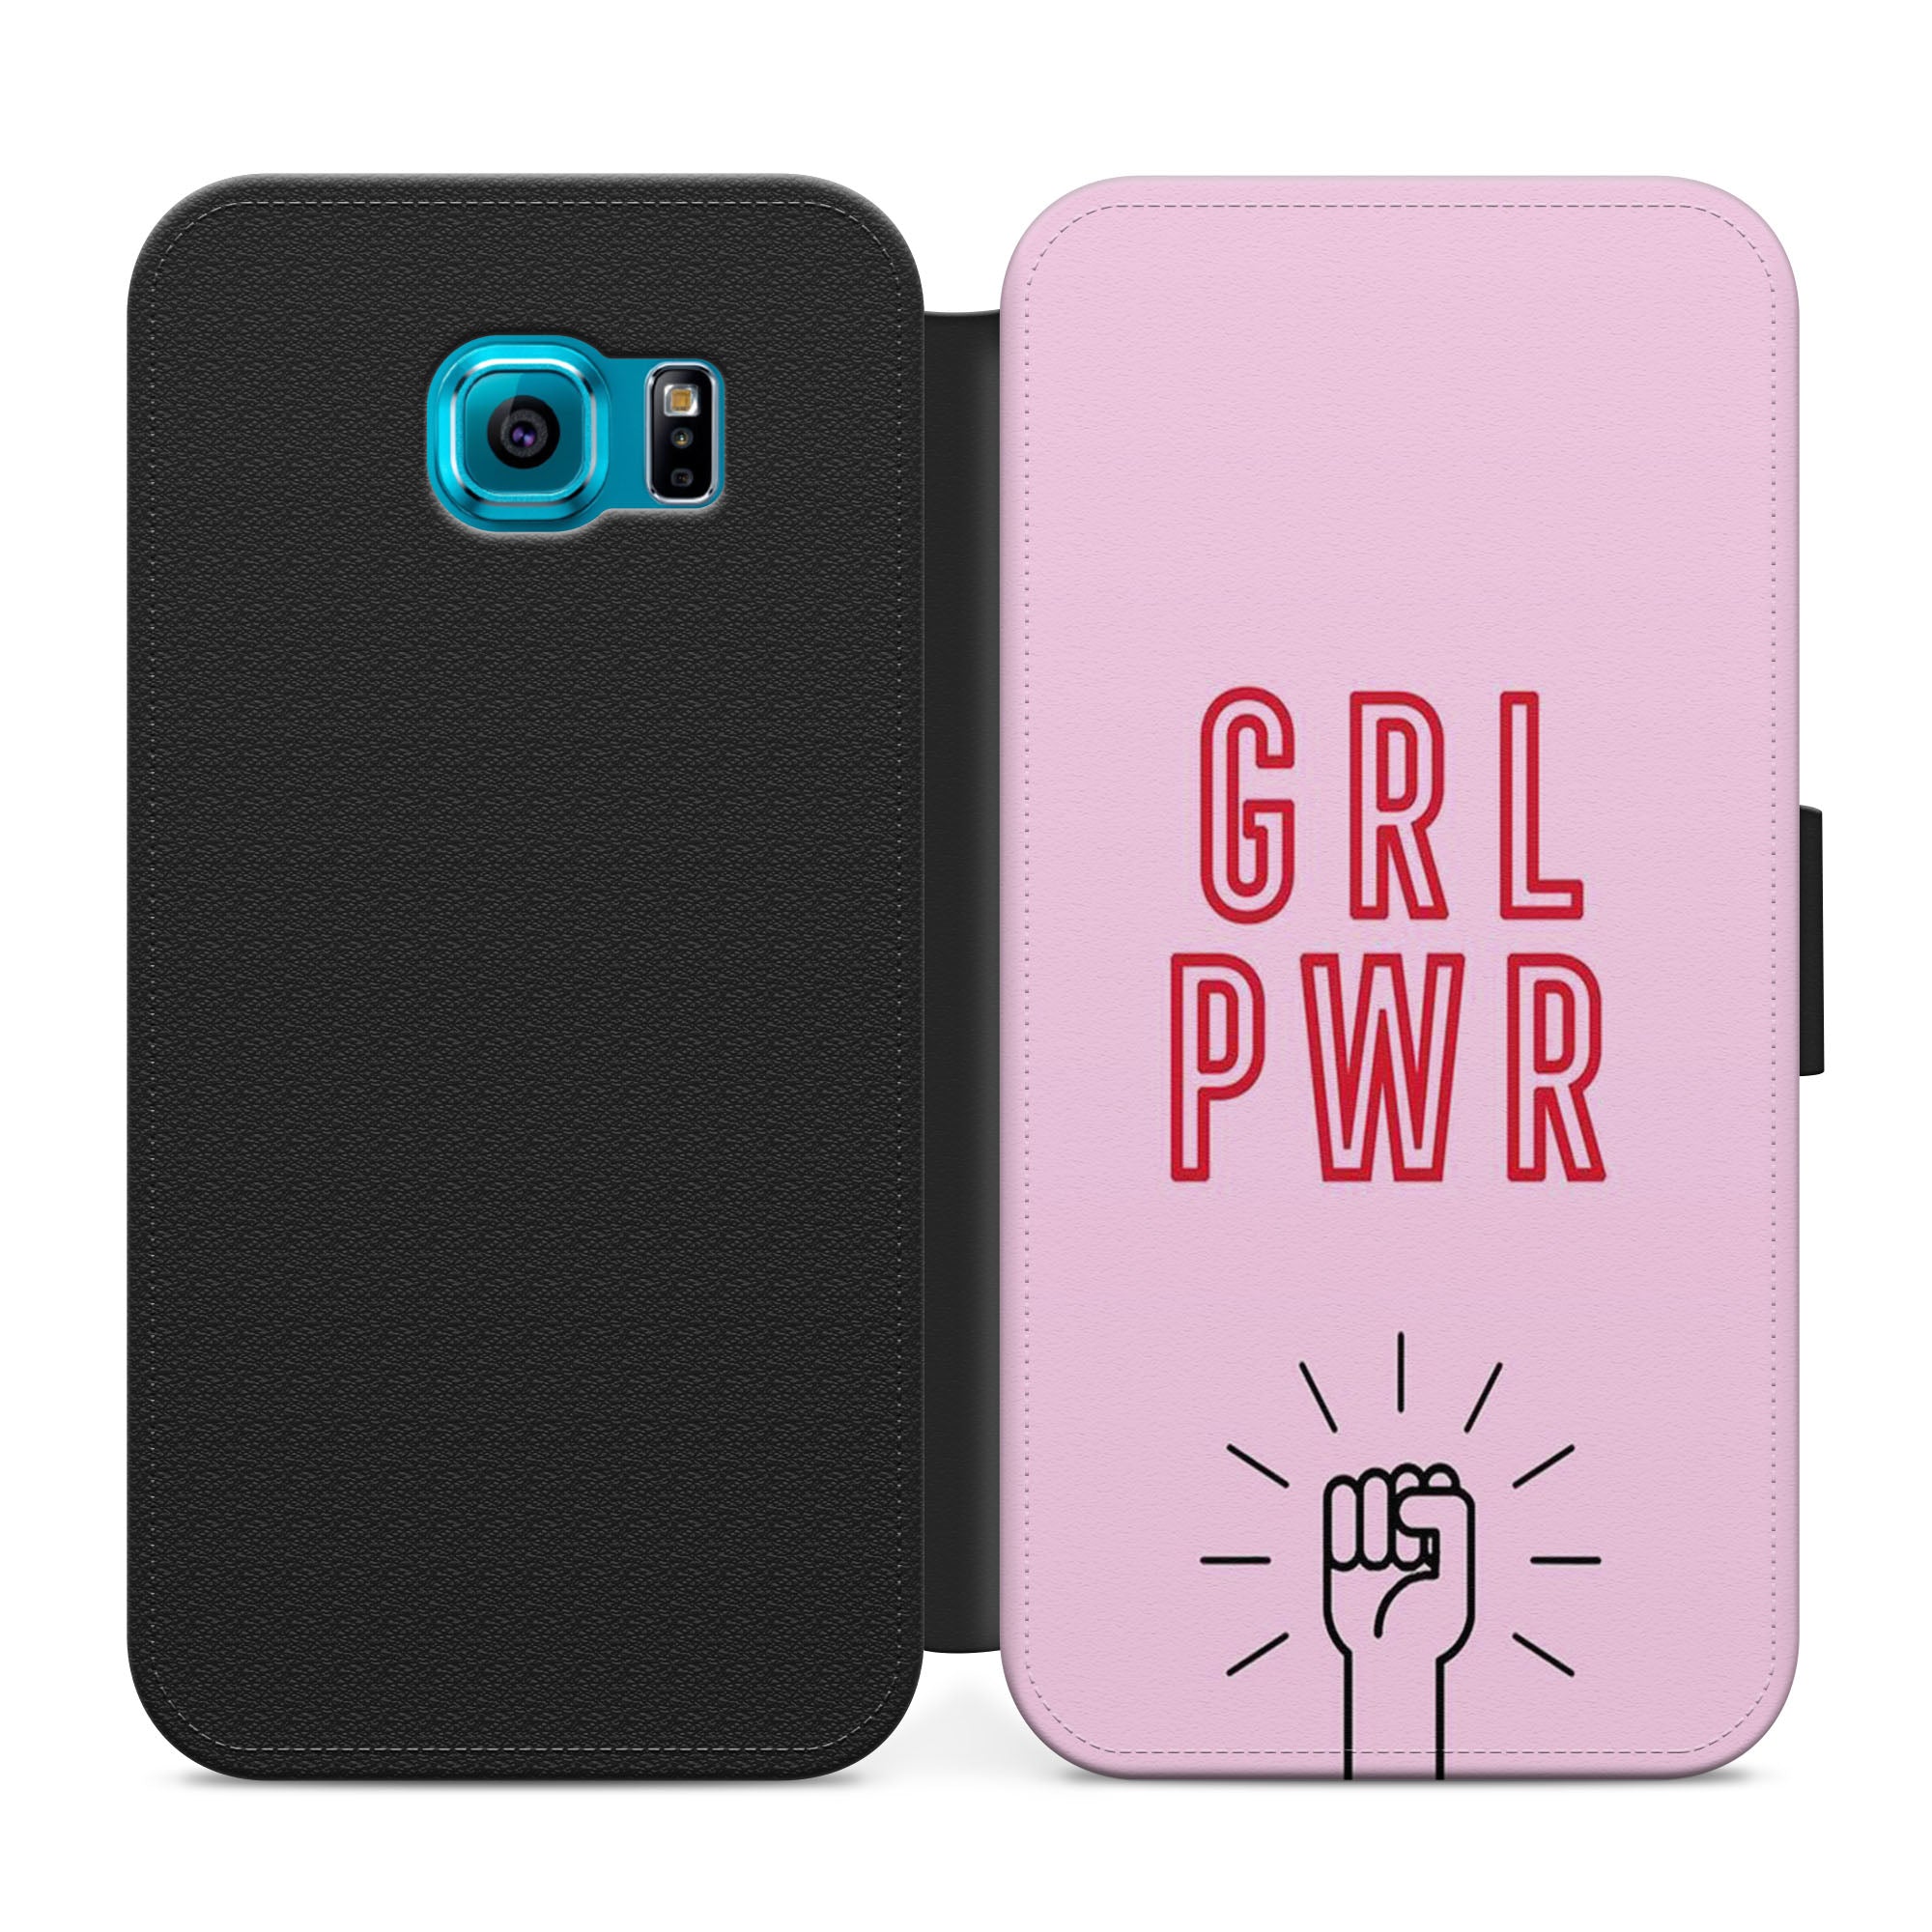 Girl Power Faux Leather Flip Case Wallet for iPhone / Samsung